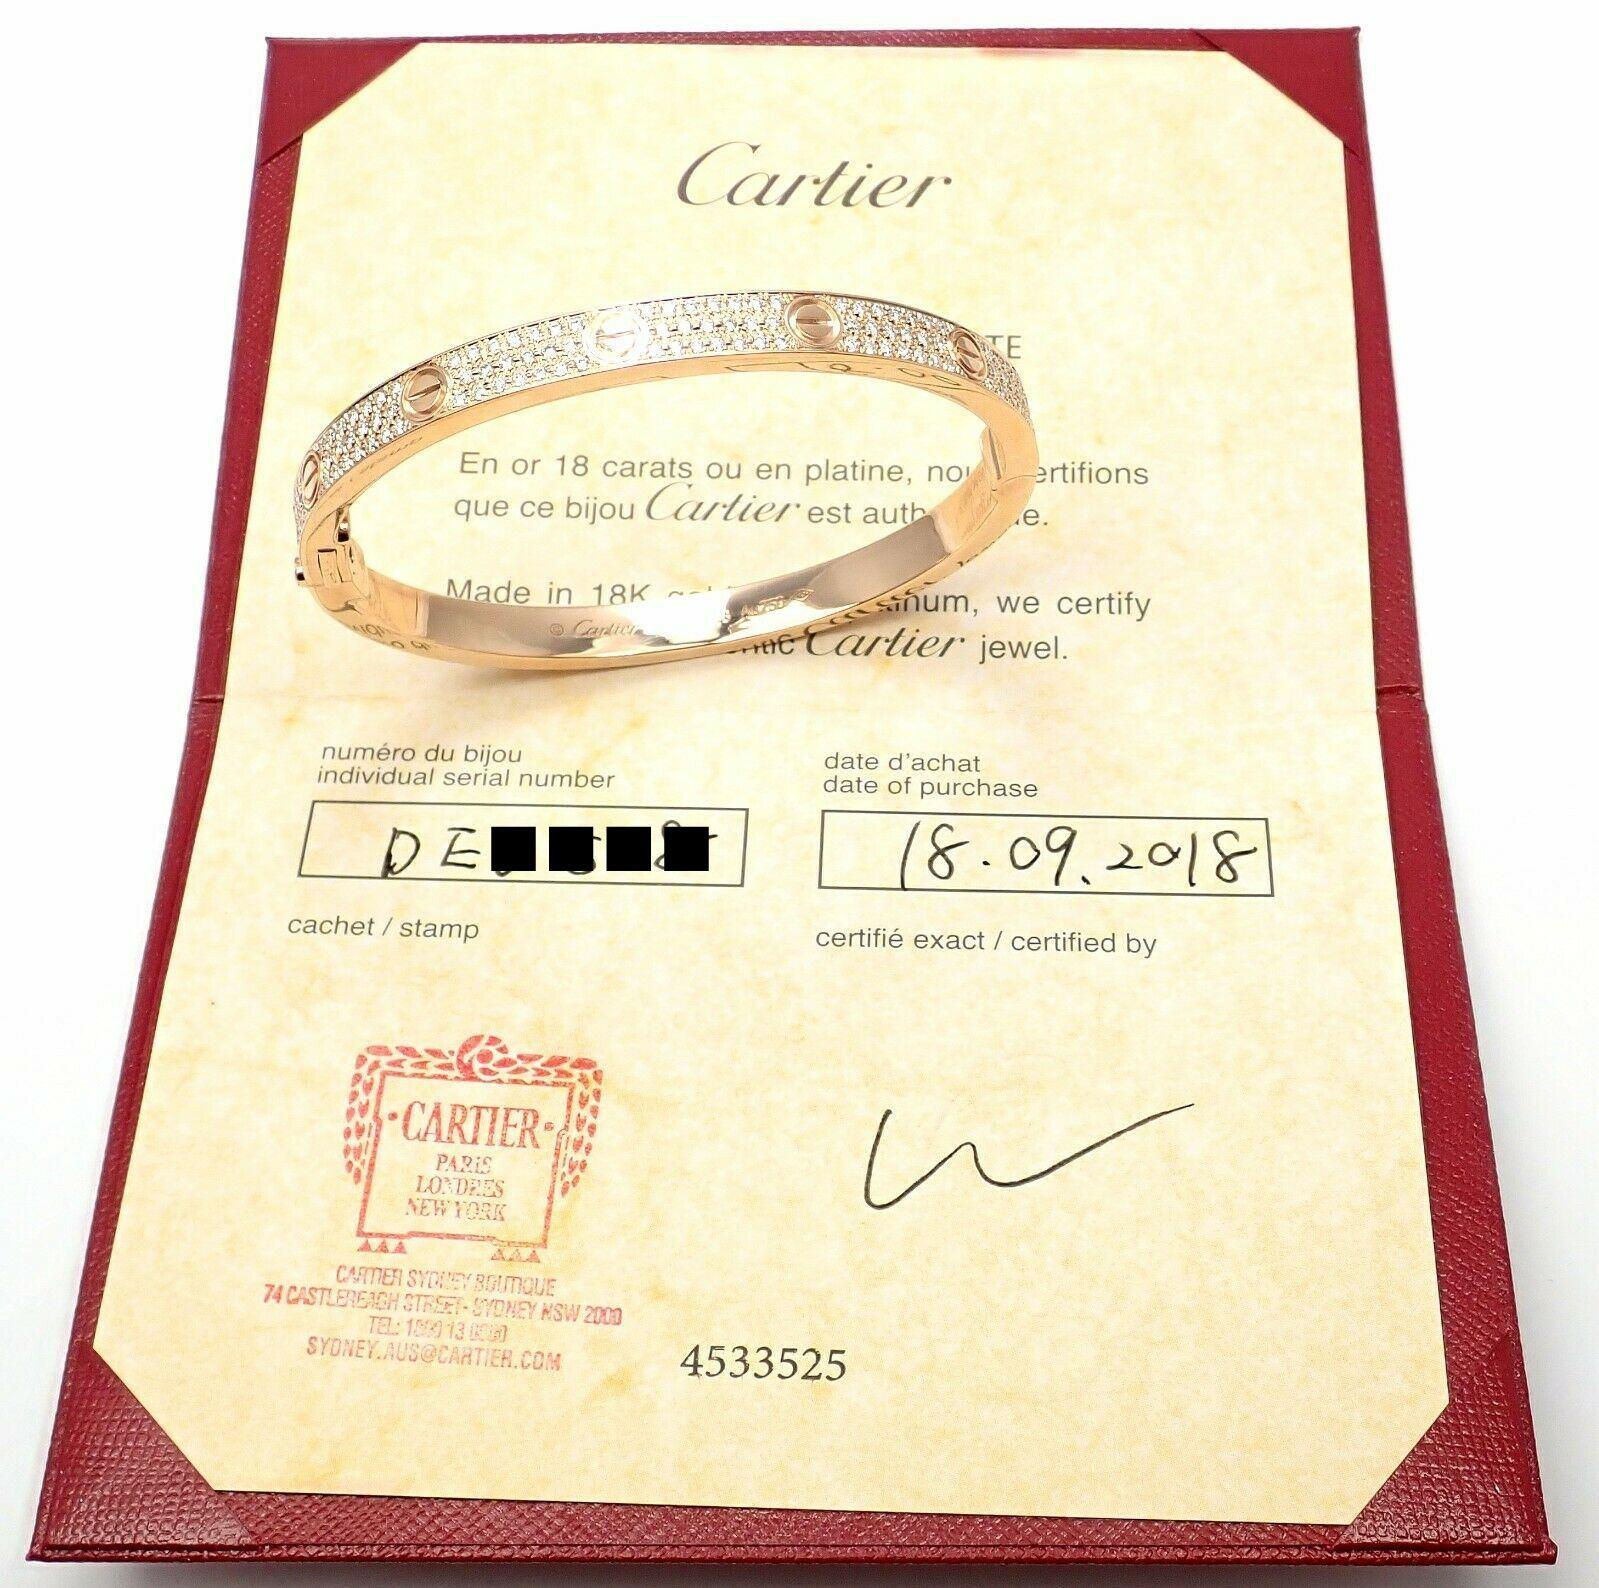 18k Rose Gold Diamond Paved LOVE Bangle Bracelet by Cartier. 
SIZE 19. 
With 204 brilliant cut VVS1 clarity, E color diamonds totaling 2 carats.
This bracelet comes with Cartier box & Cartier certificate of authenticity and a sales receipt.
Retail